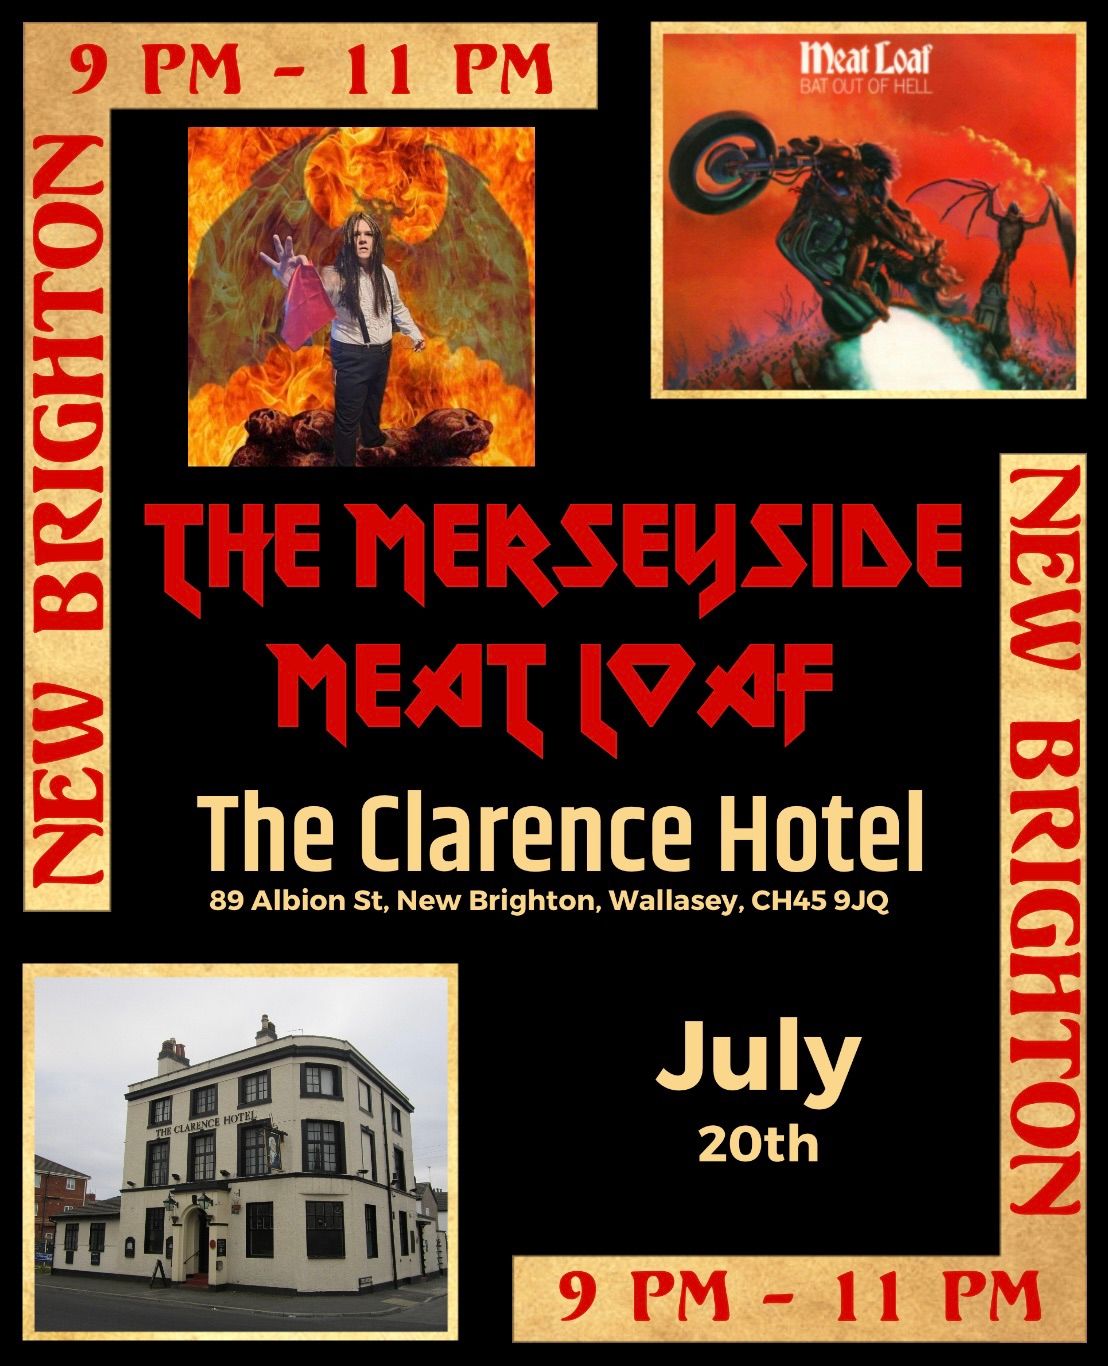 The Merseyside Meat Loaf Show